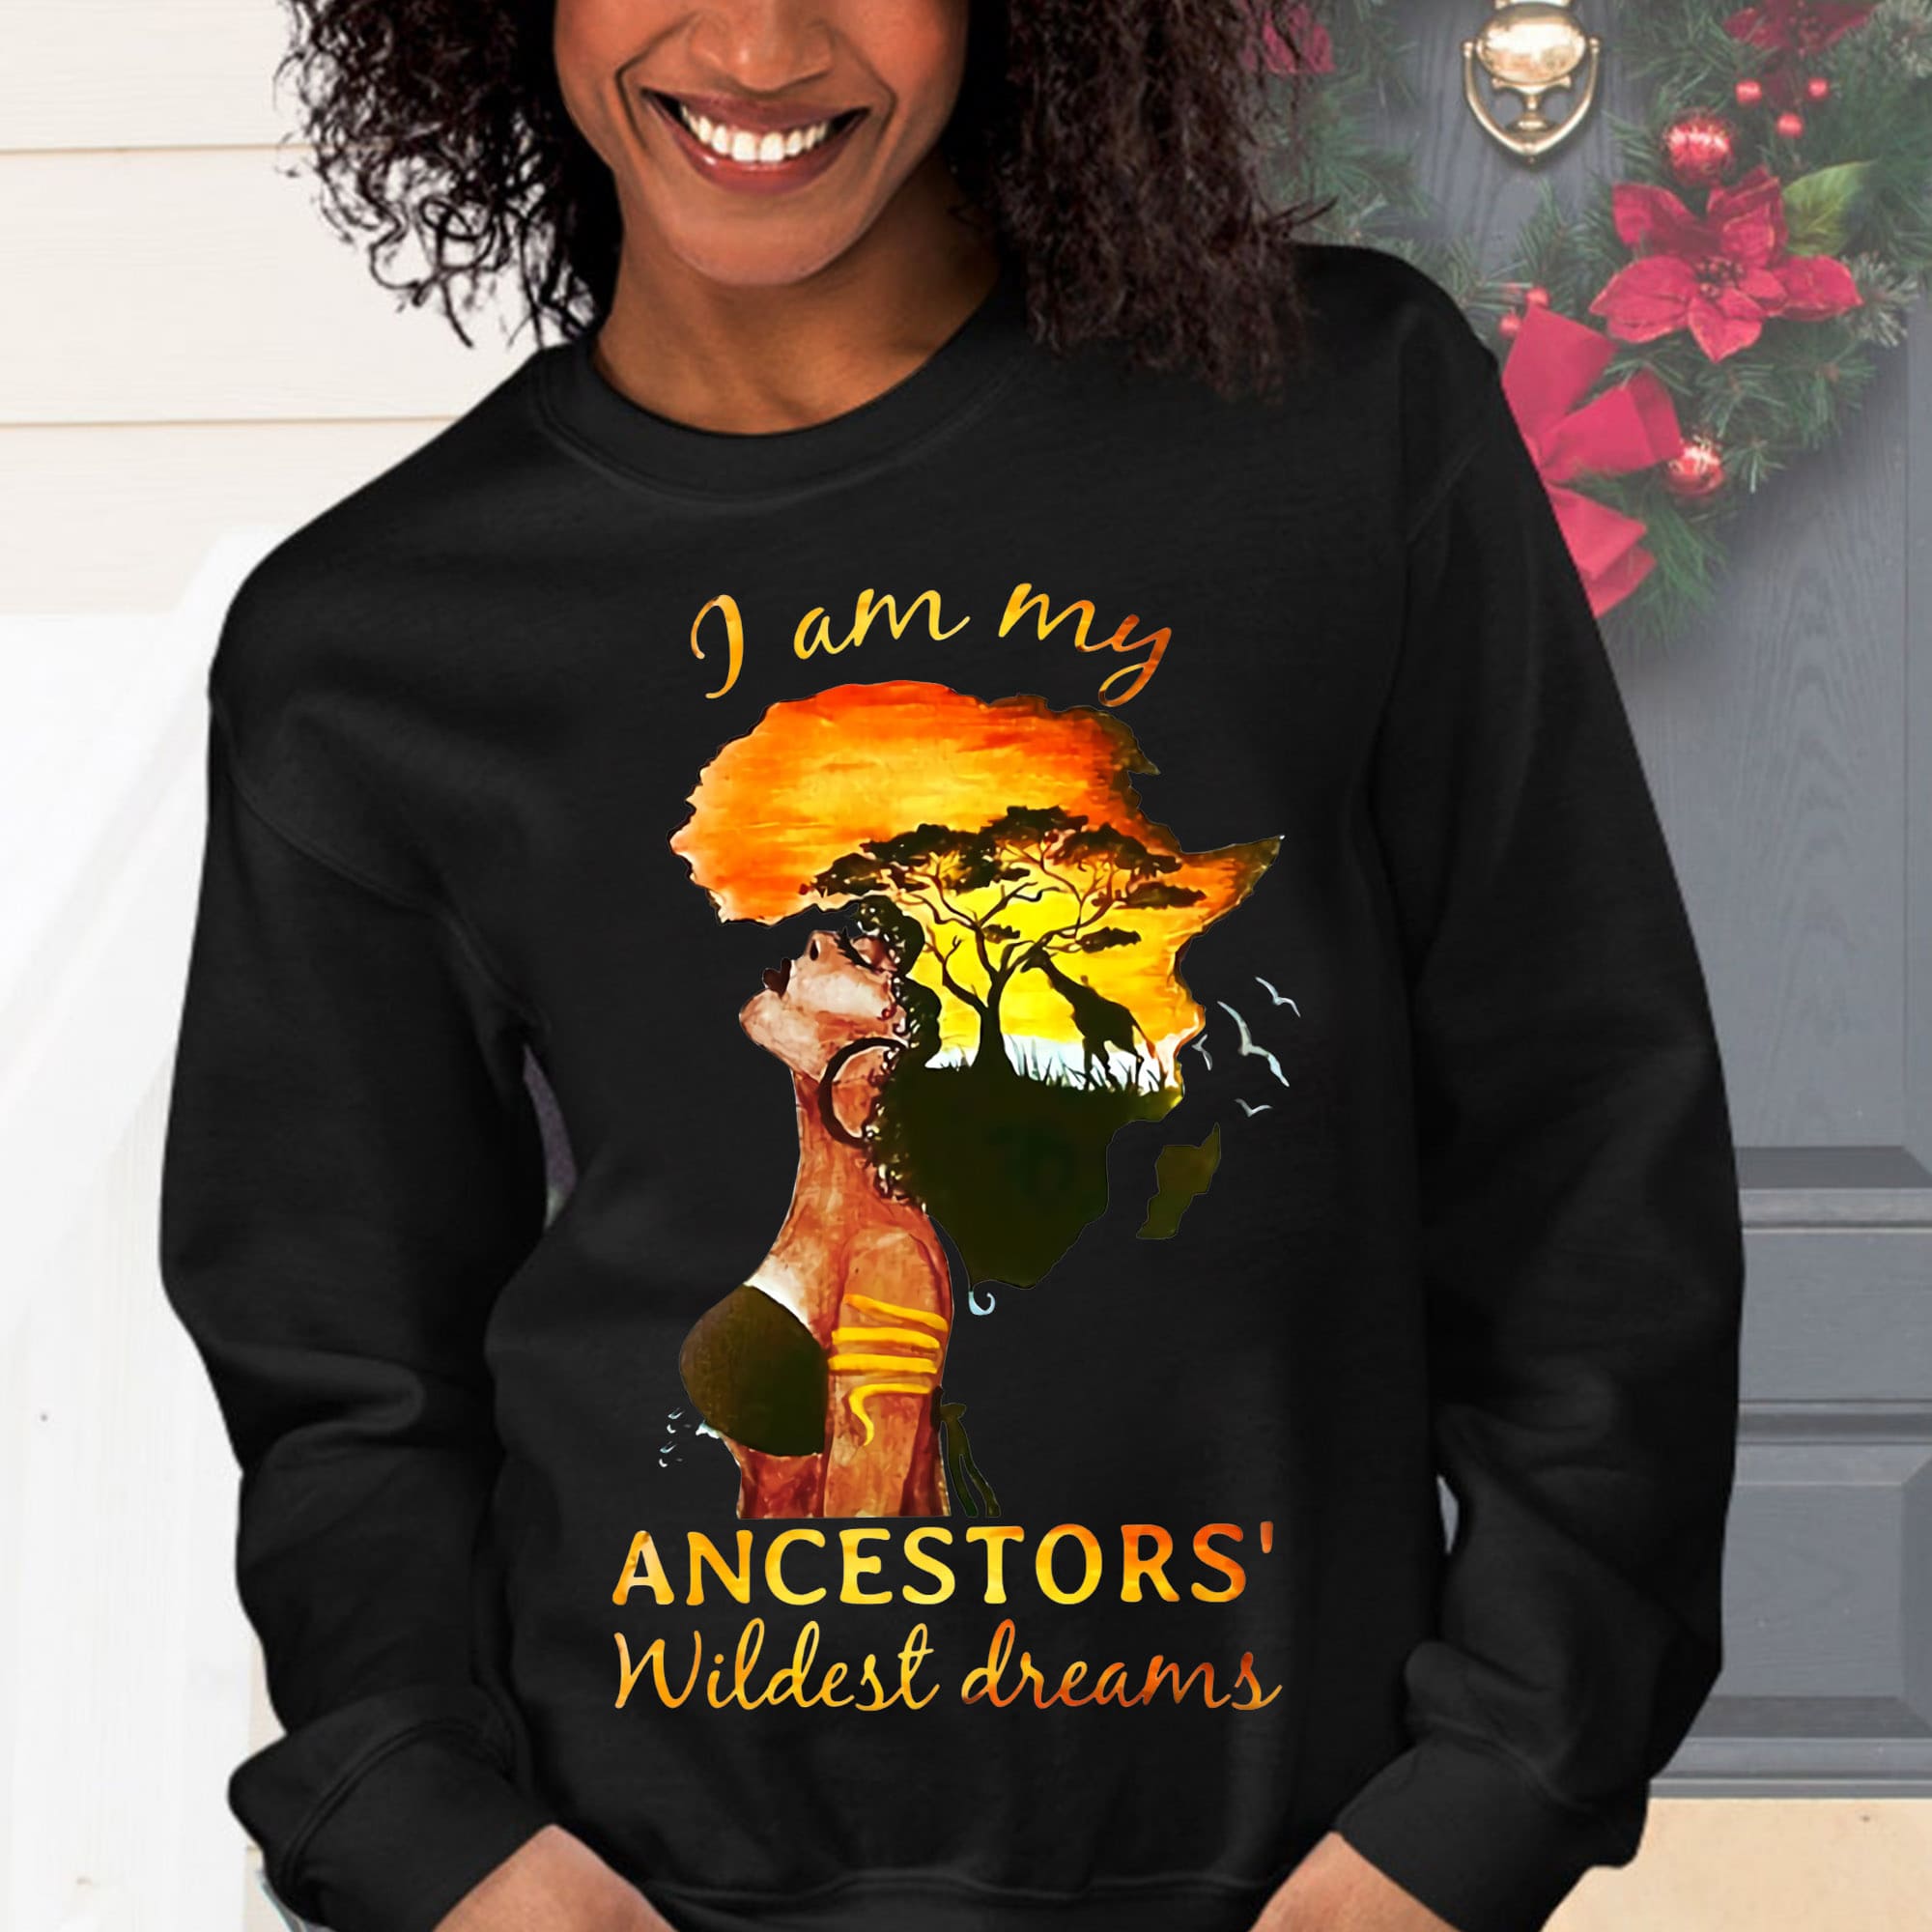 I am my ancestors wildest dreams - African girl, gift for black woman